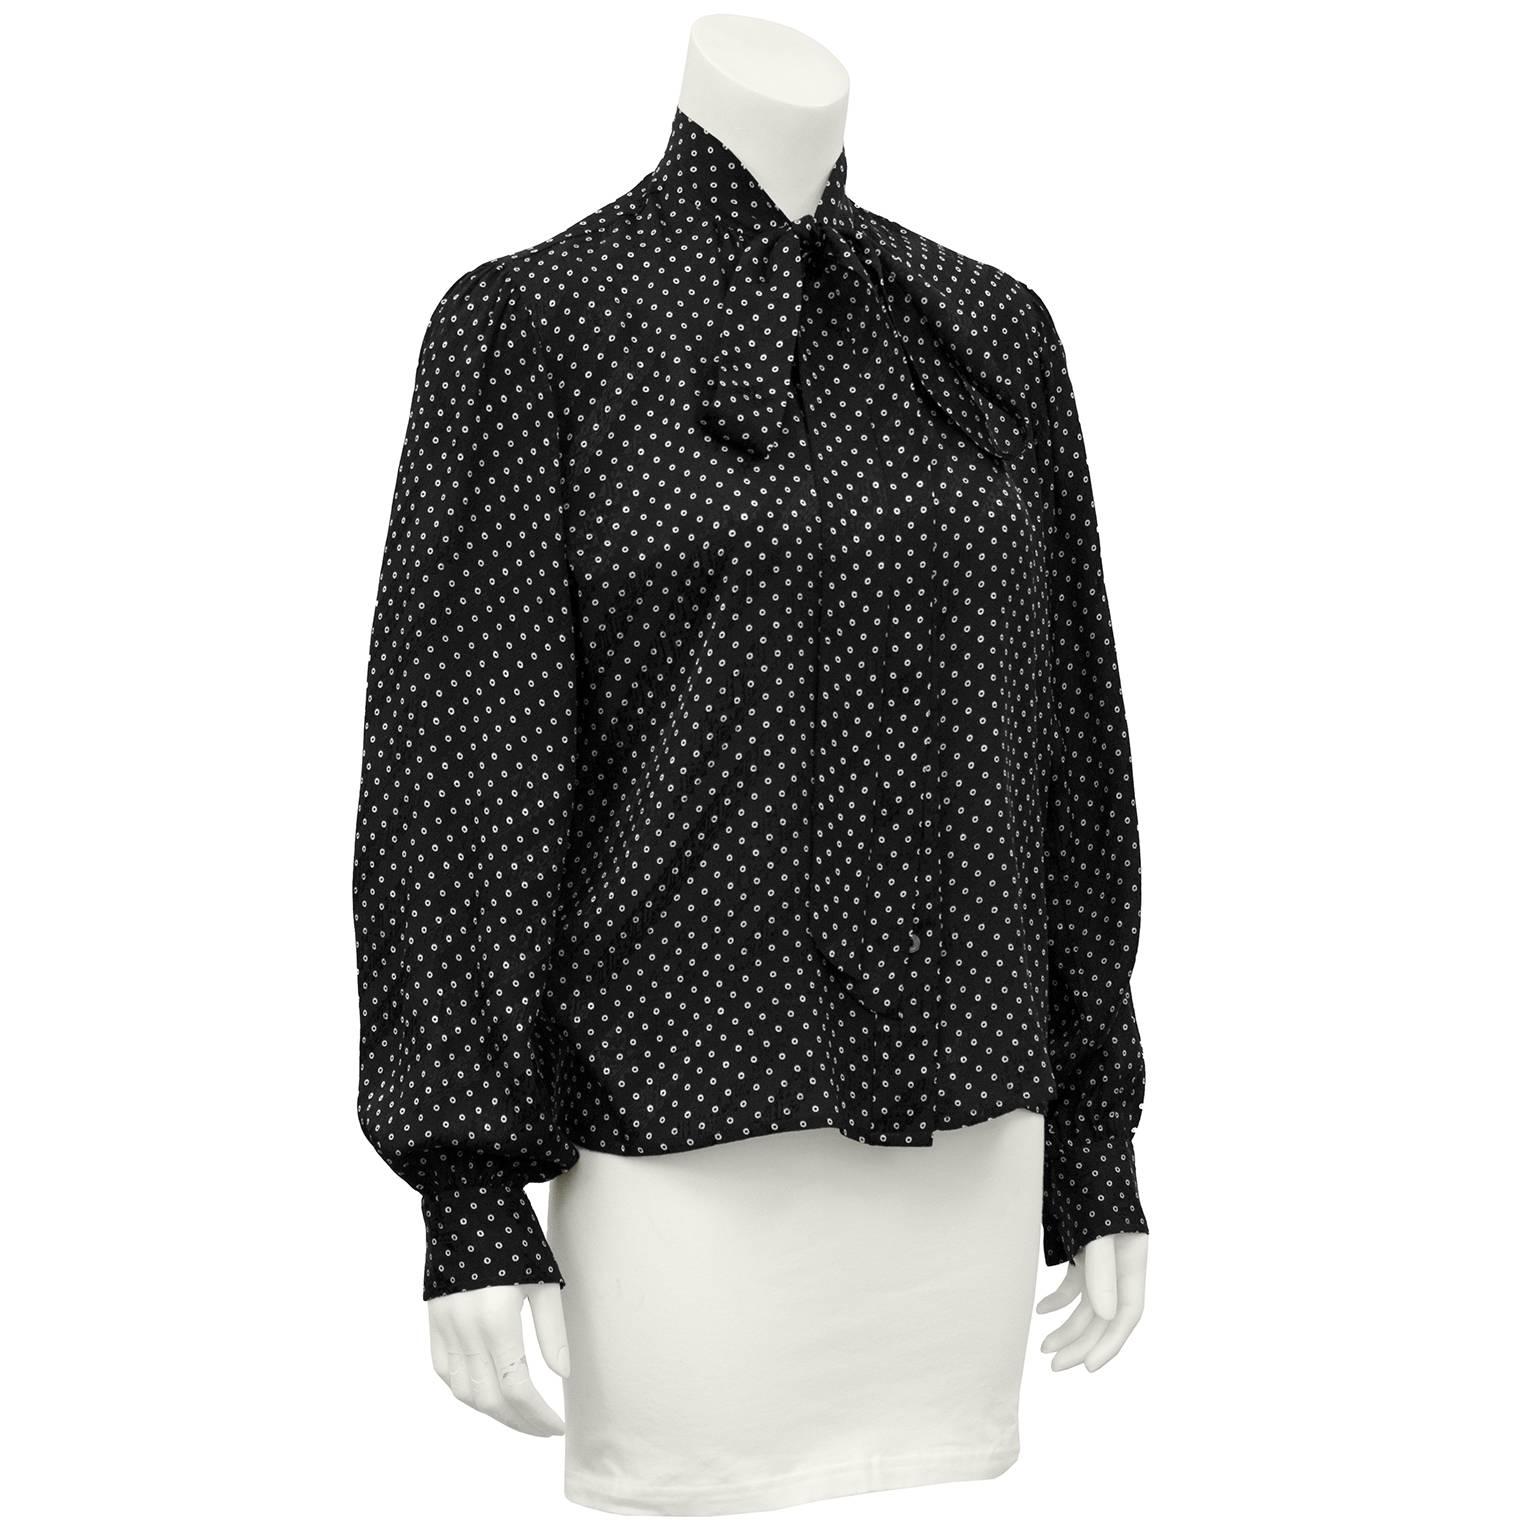 Classic YSL 1980's blouse. Black silk jacquard with small white polka dots. Thin pussy bow neck tie. Marked size FR 42, fits like a US 6. Excellent vintage condition. 

Sleeve 21" Shoulder 25" Bust 42" Waist 42" Hips 42"